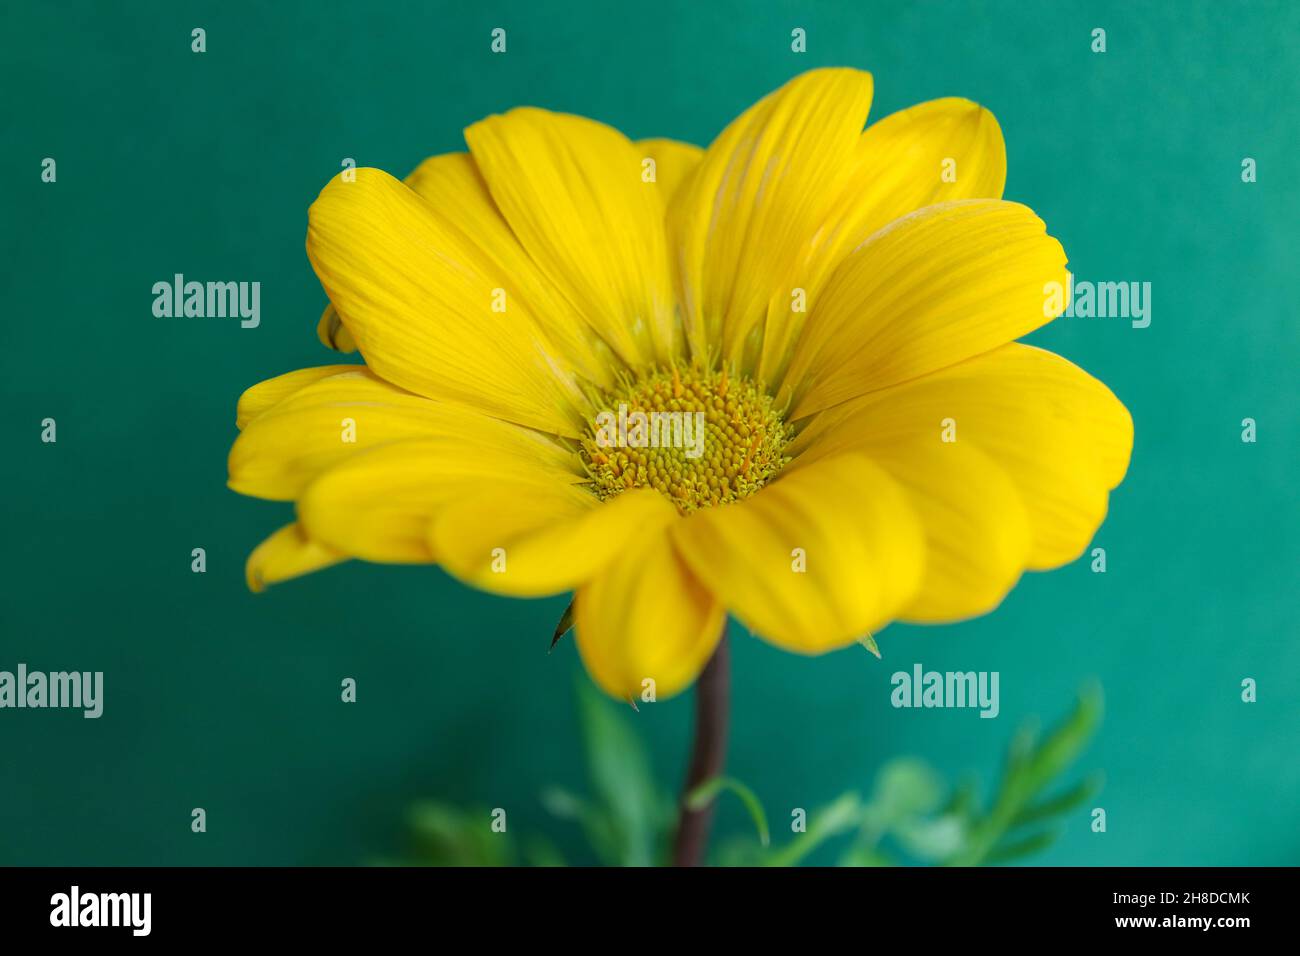 Yellow Gazania on green background, Gazania with delicate petals, yellow stamens and green leaf, flower head macro, blooming flower, beauty in nature Stock Photo